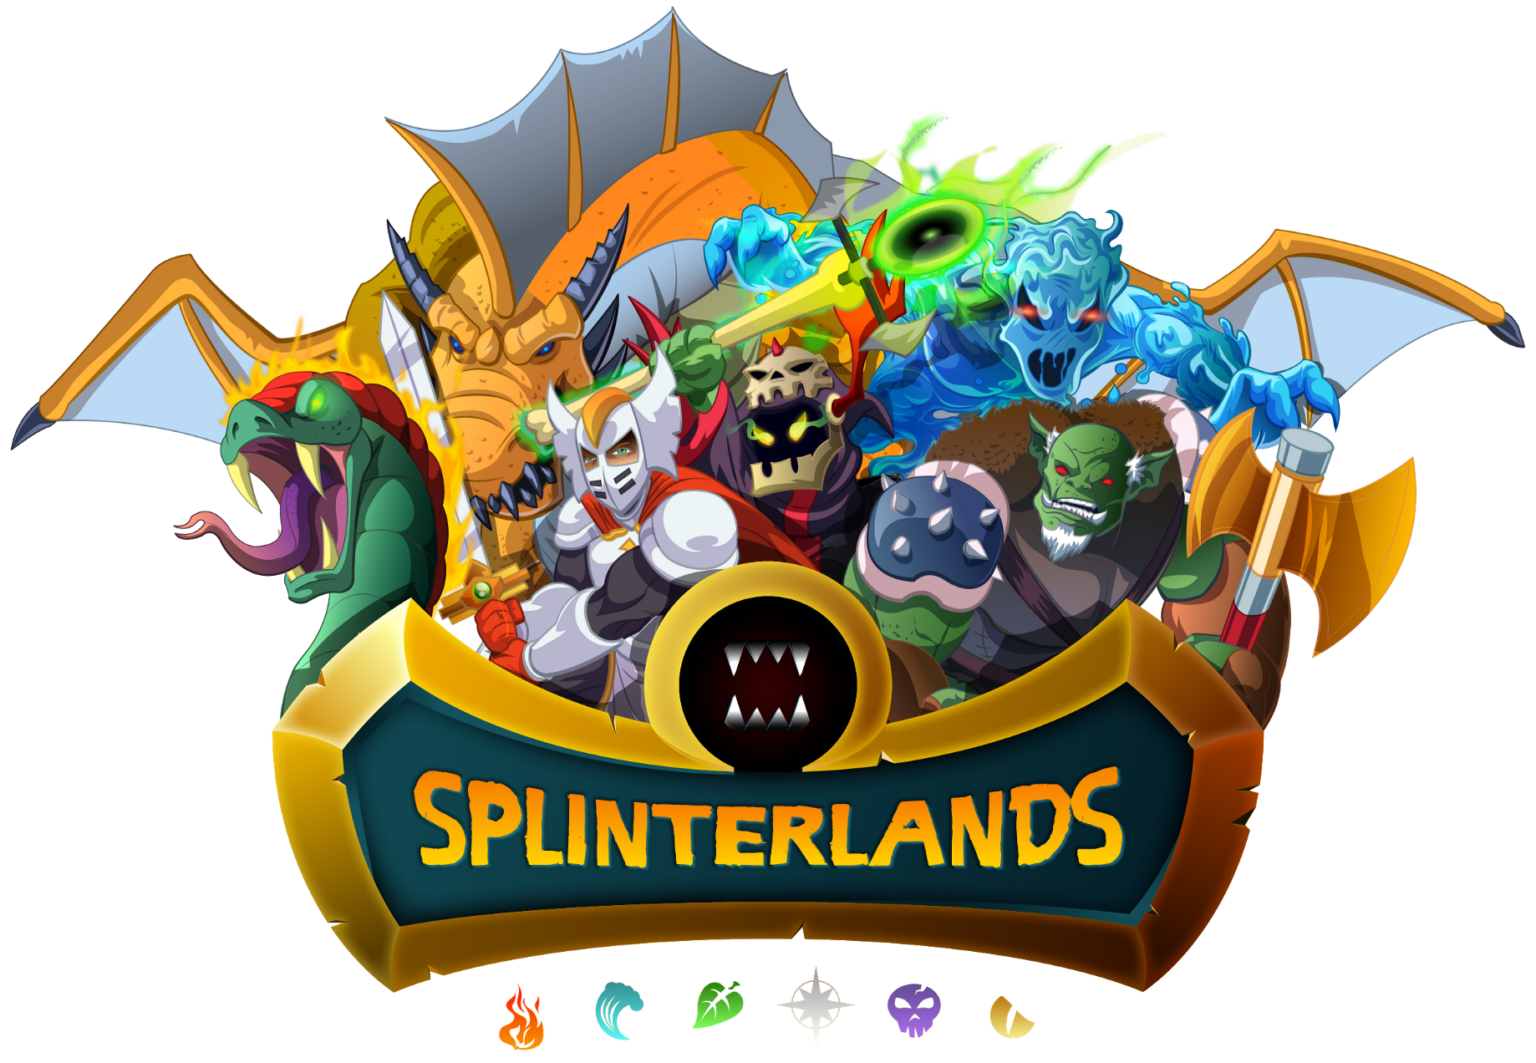 xSplinterlands-1536x1063.png.pagespeed.ic.H0nW9rnG7E.png